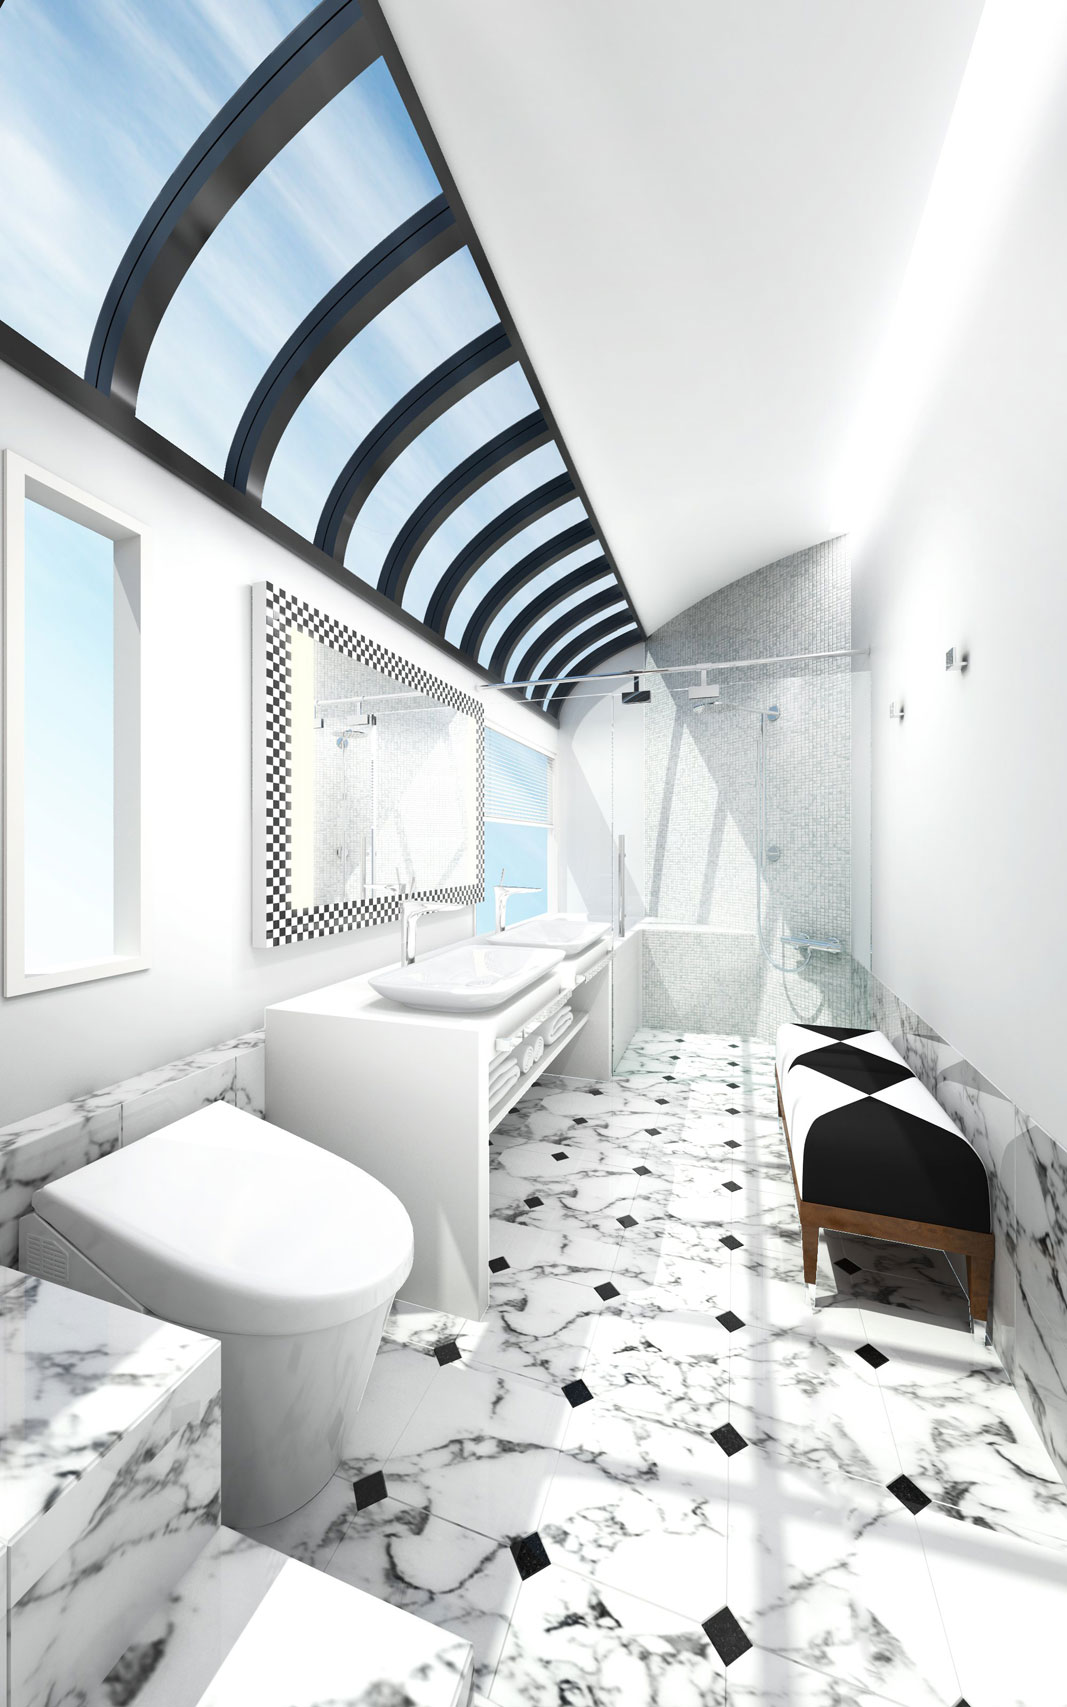 A rendering of a deluxe suite bathroom.